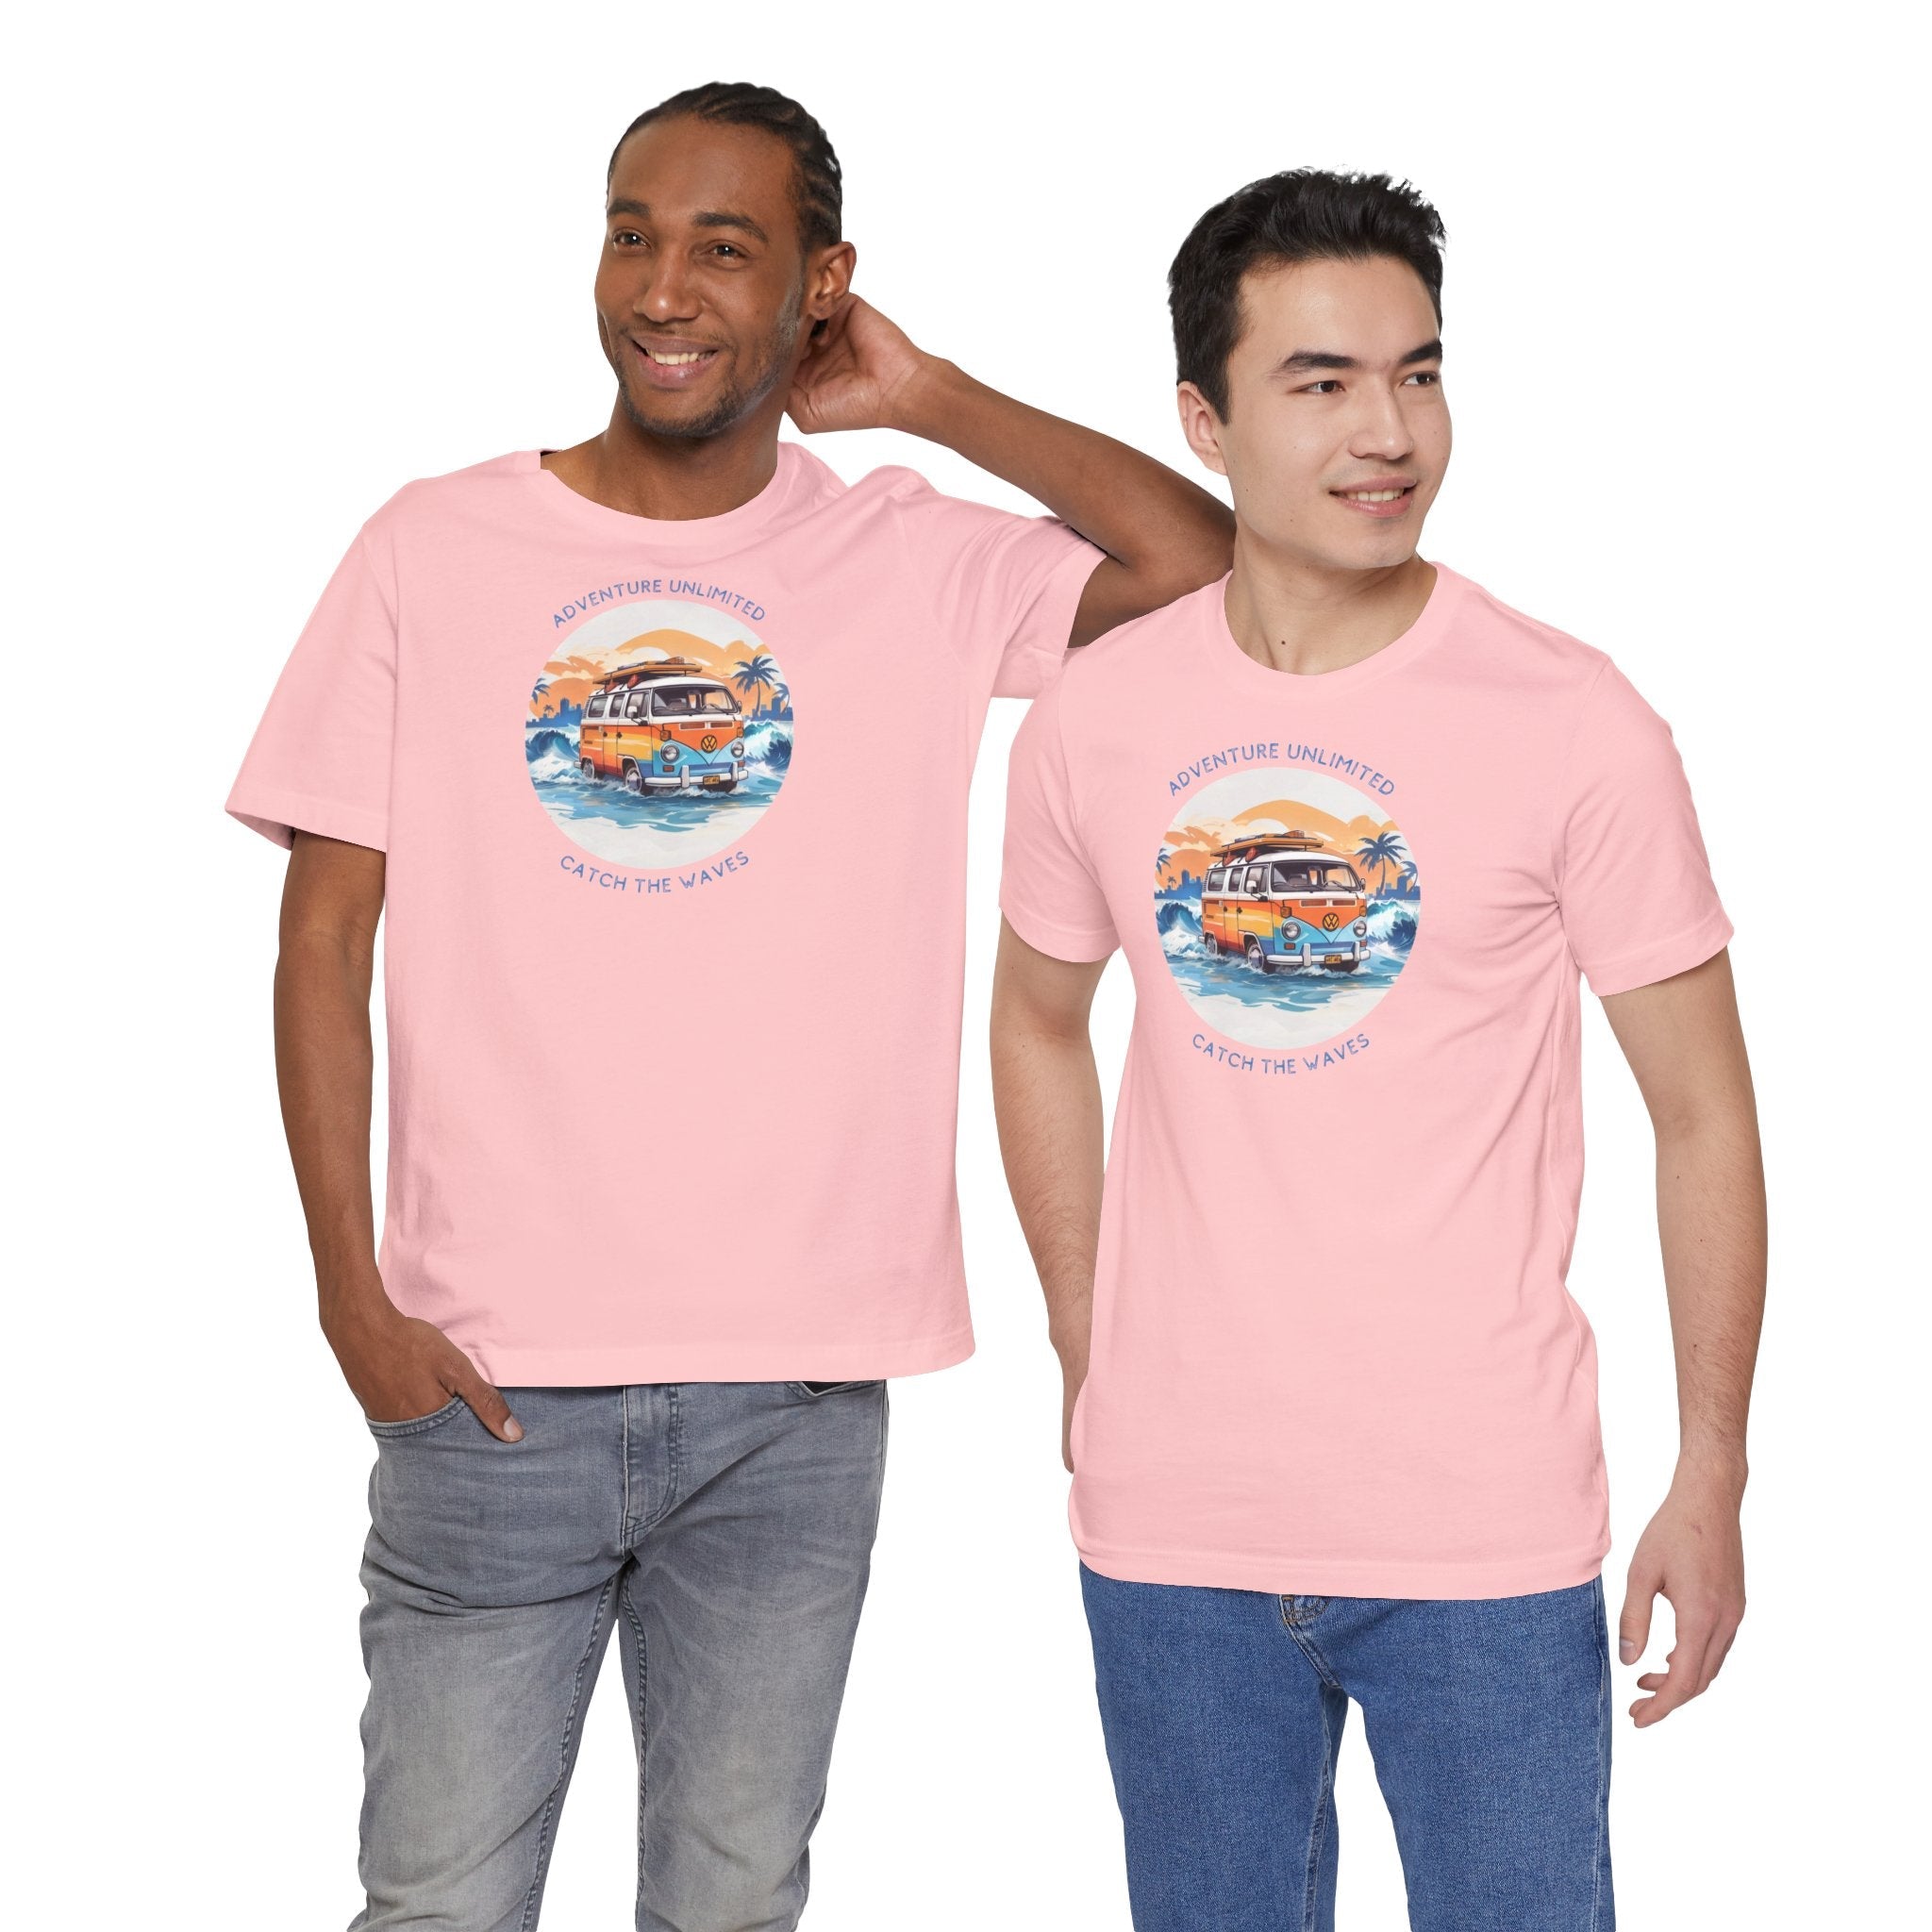 Adventure Unlimited Surfing T-Shirt featuring man and woman in pink shirts printed with ’I’m’ - direct-to-garment item